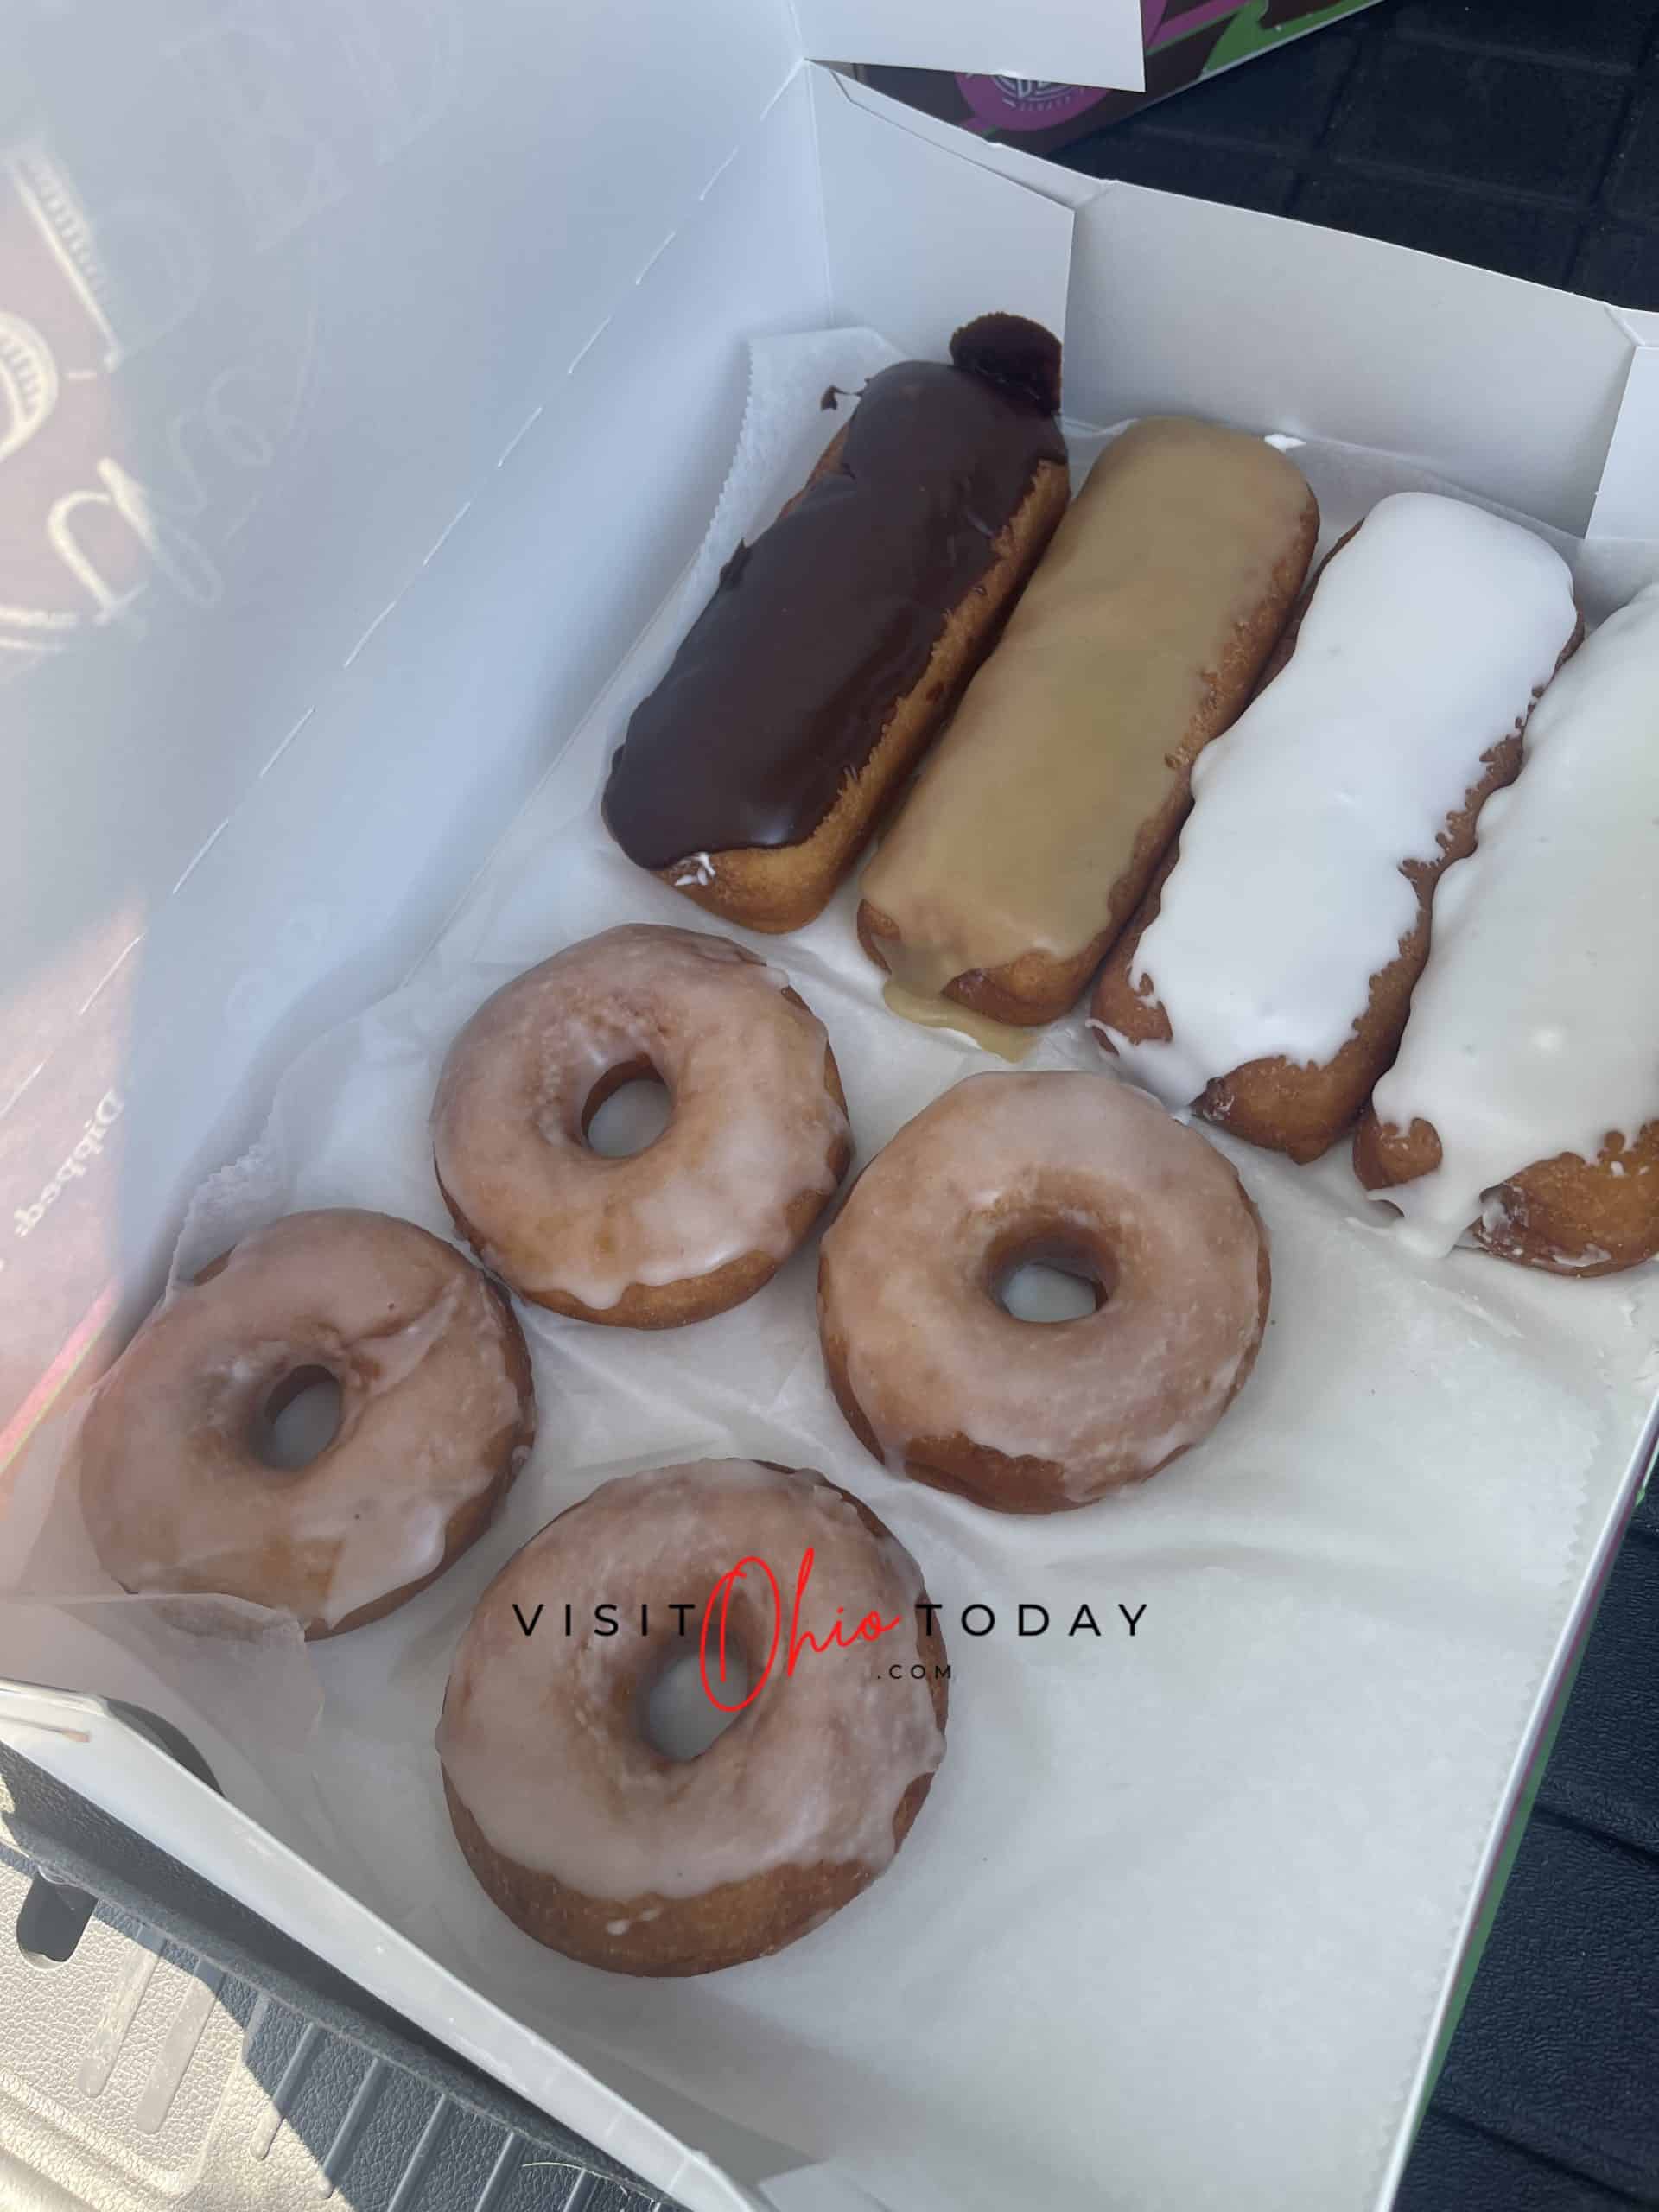 vertical photo showing a box of donuts from gluten free from the dipped. 4 round donuts and 4 finger donuts